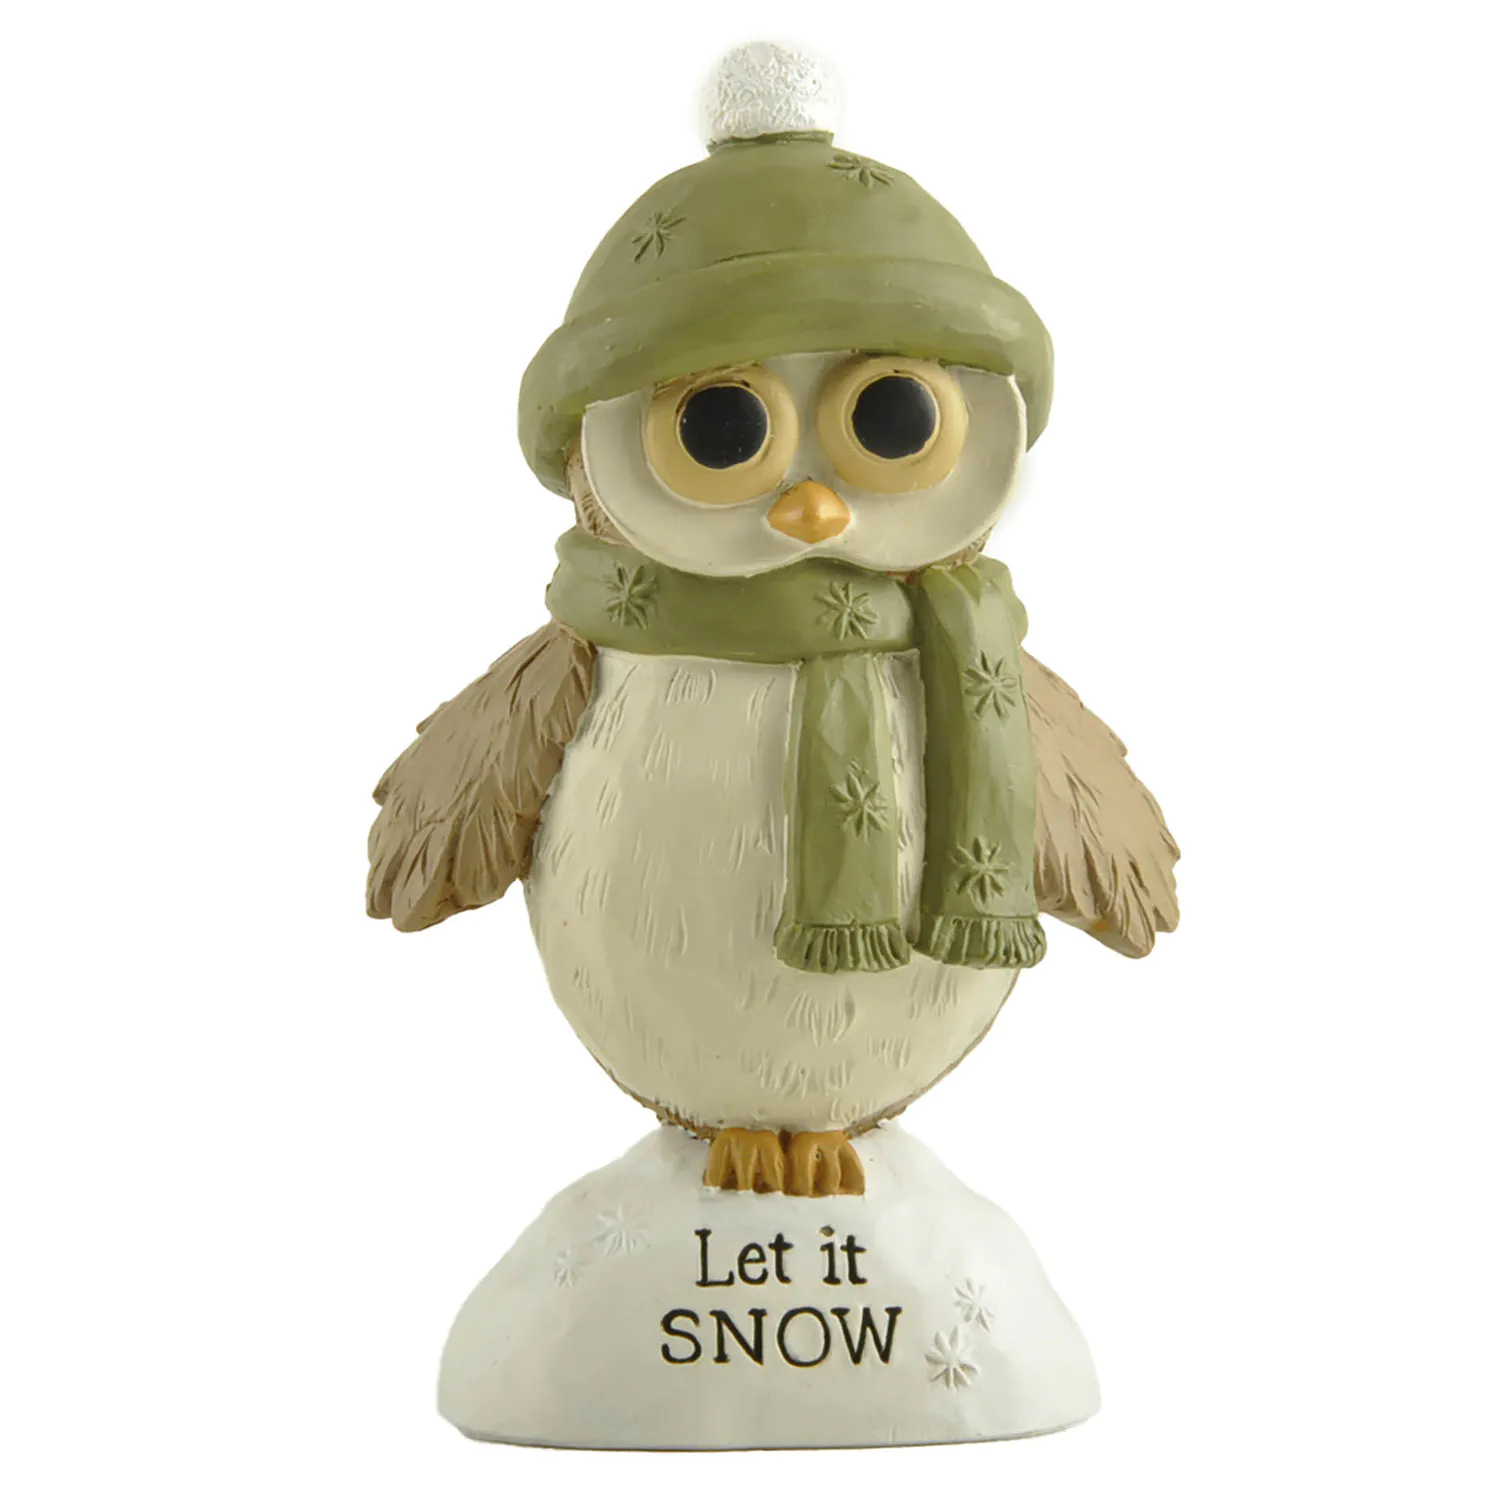 Cute Cartoon Style Resin Owl Statue Winter Holiday Decor with 'Let it SNOW' Base, Green Hat and Scarf Ensemble for Home Decor 238-13894